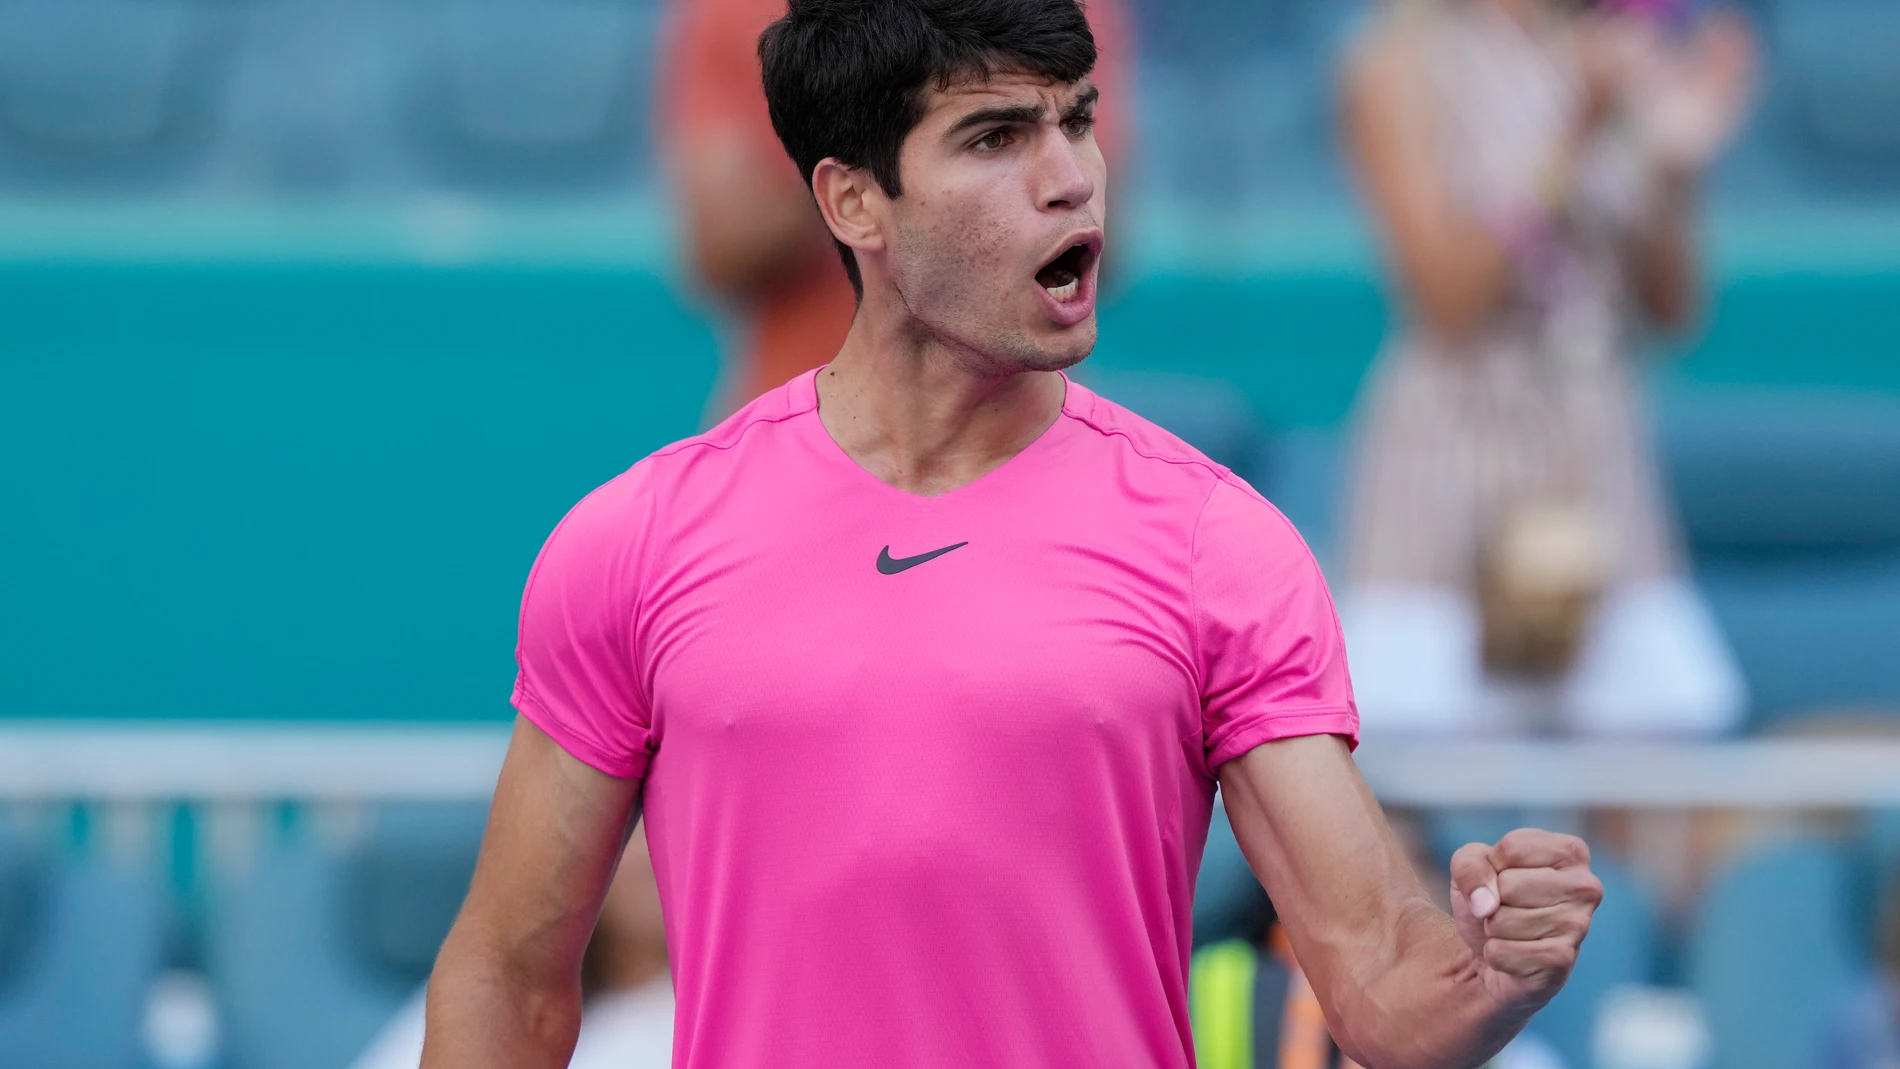 Carlos Alcaraz of Spain reacts after winning a match against Dusan Lajovic of Serbia during the Miami Open tennis tournament, Sunday, March 26, 2023, in Miami Gardens, Fla. (AP Photo/Marta Lavandier)